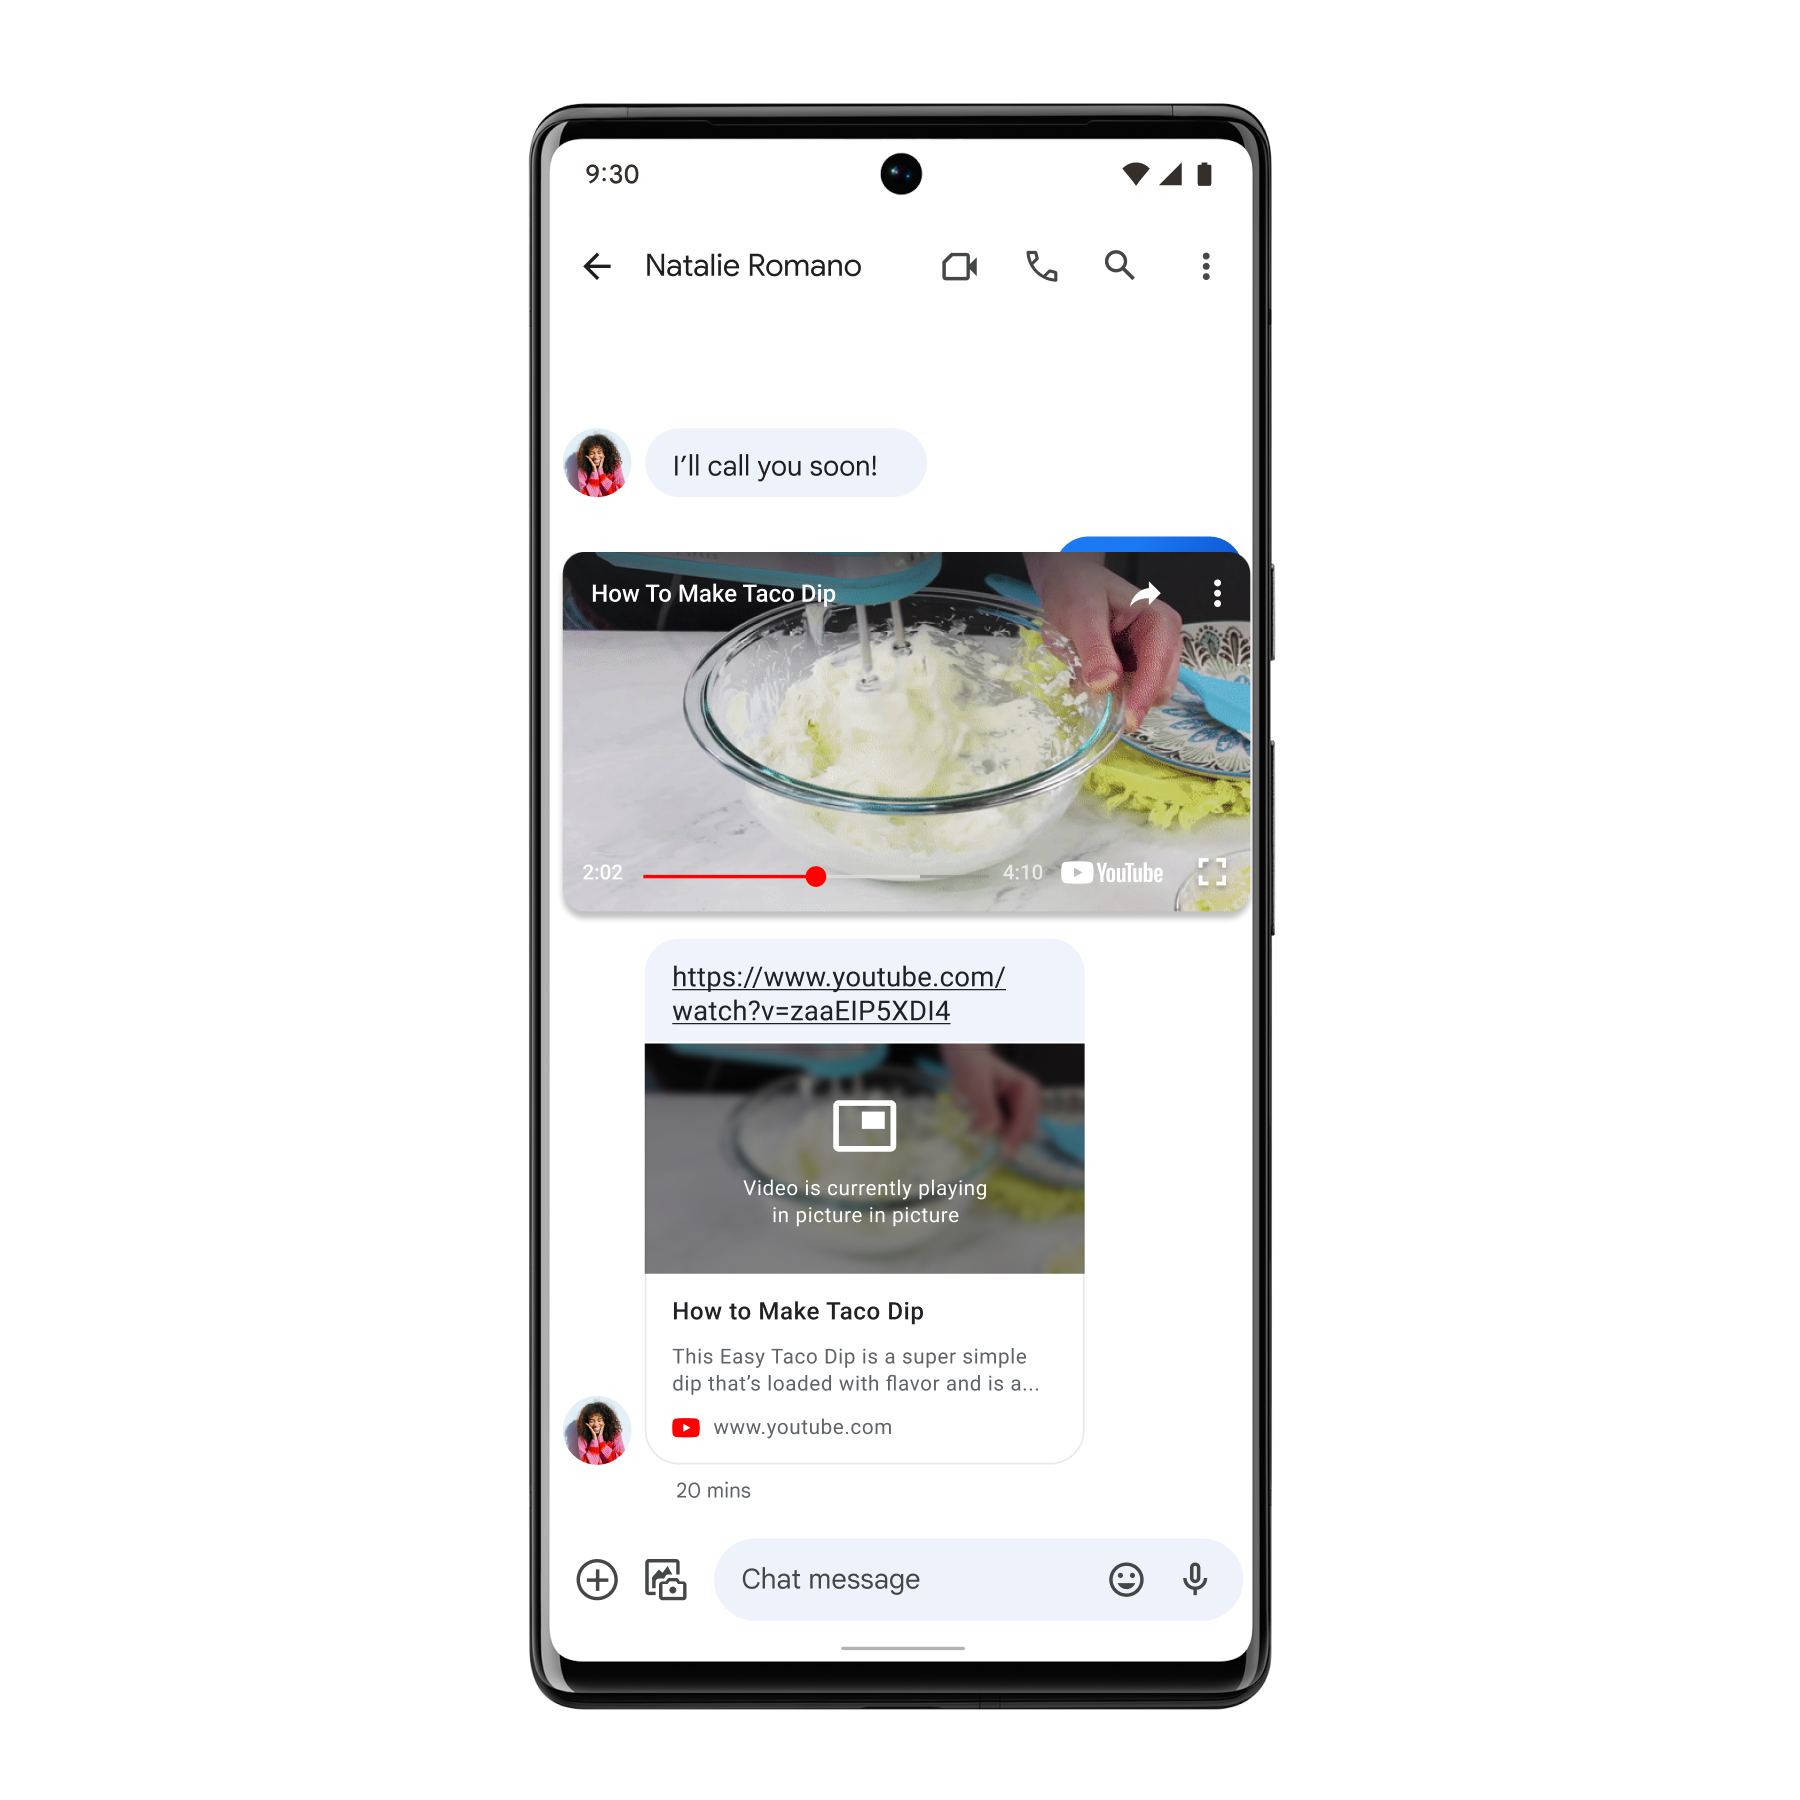 Phone showing the YouTube picture in picture feature, where a user is watching a video of a taco dip recipe, while continuing their chat conversation